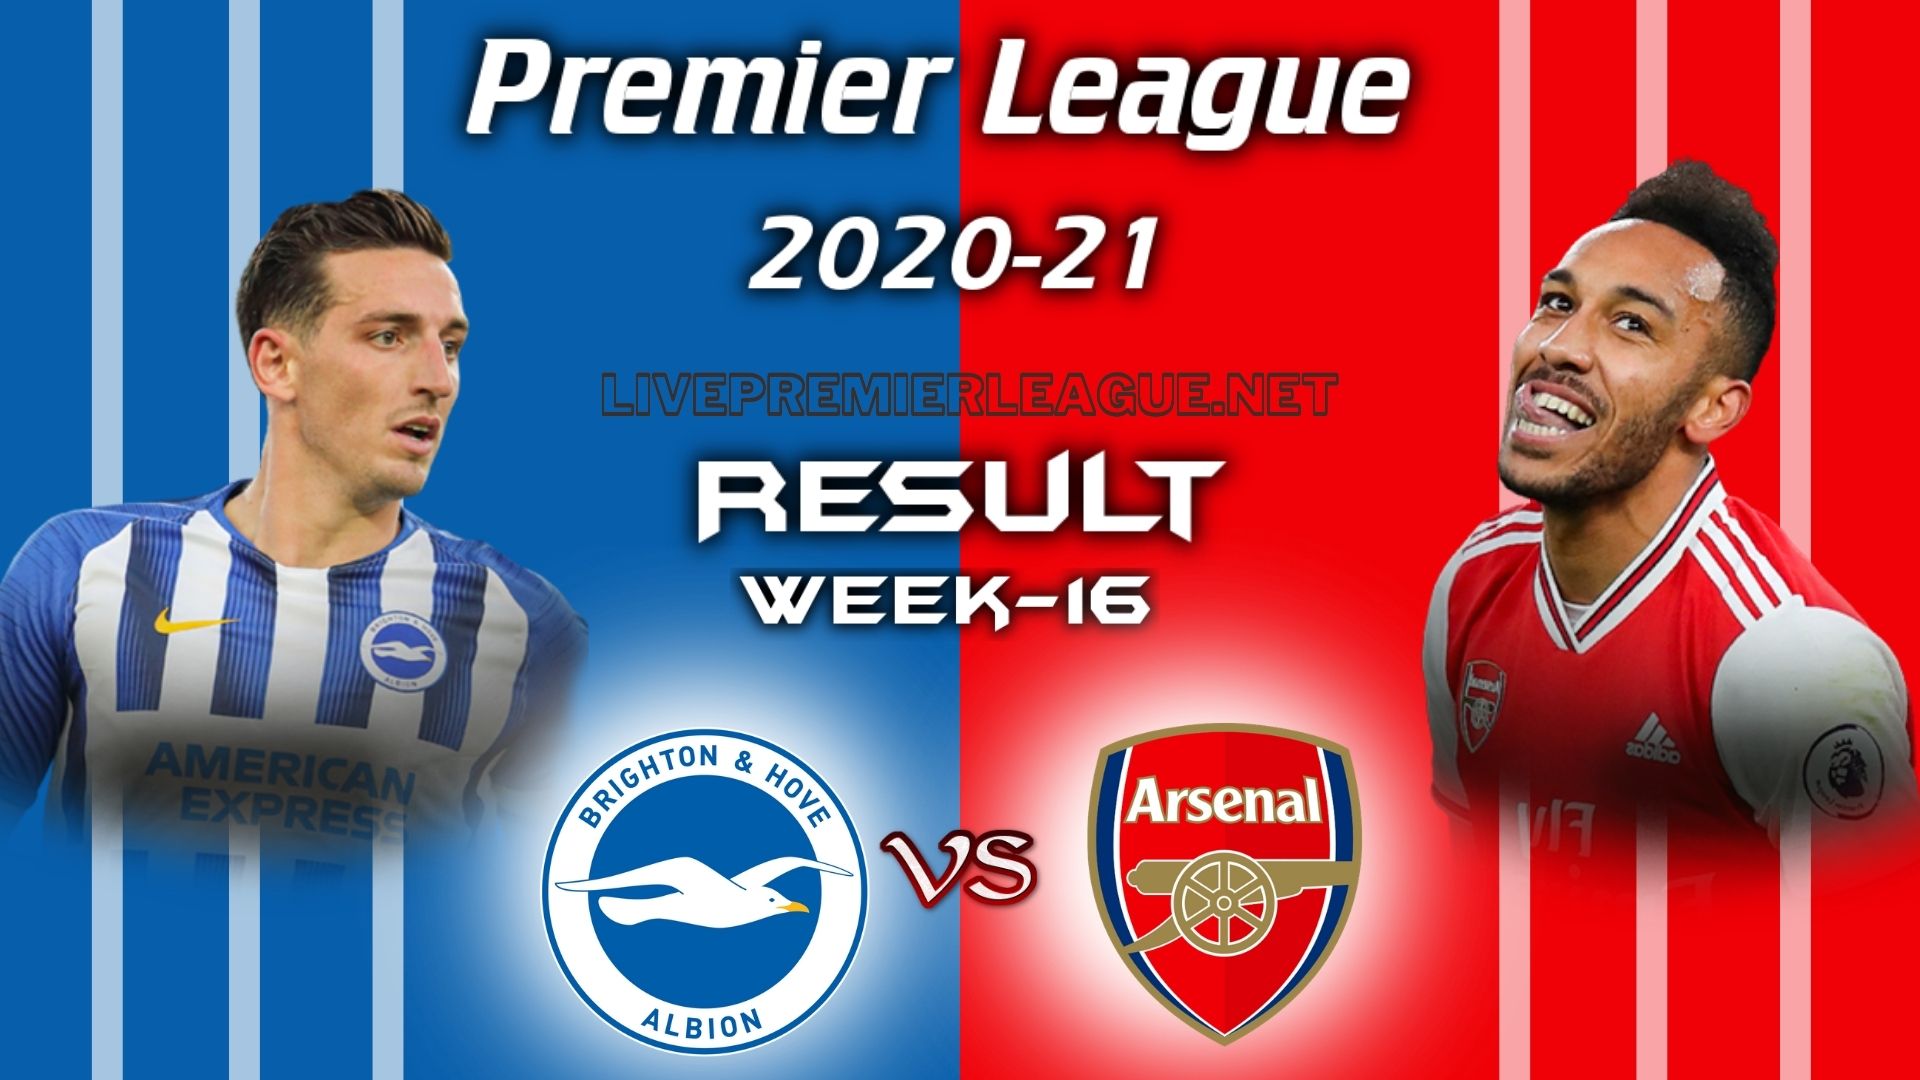 Brighton and Hove Albion Vs Arsenal | EPL Week 16 Result 2020